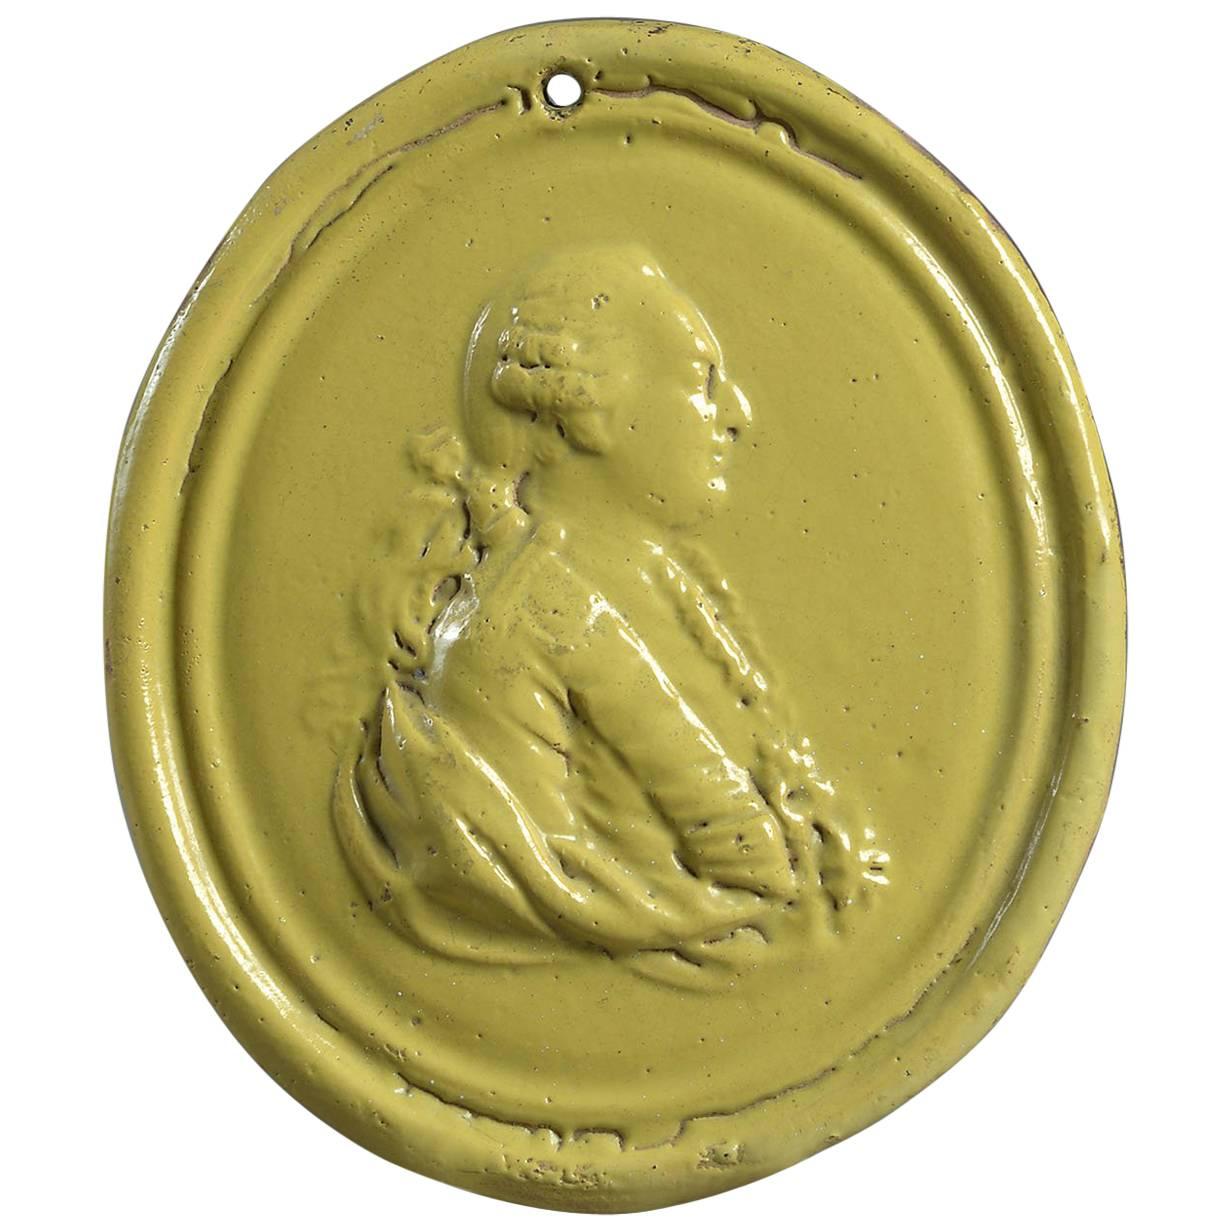 Rare & Unusual Bright Yellow/Green Glazed Terracotta Plaque of King Louis XVI For Sale